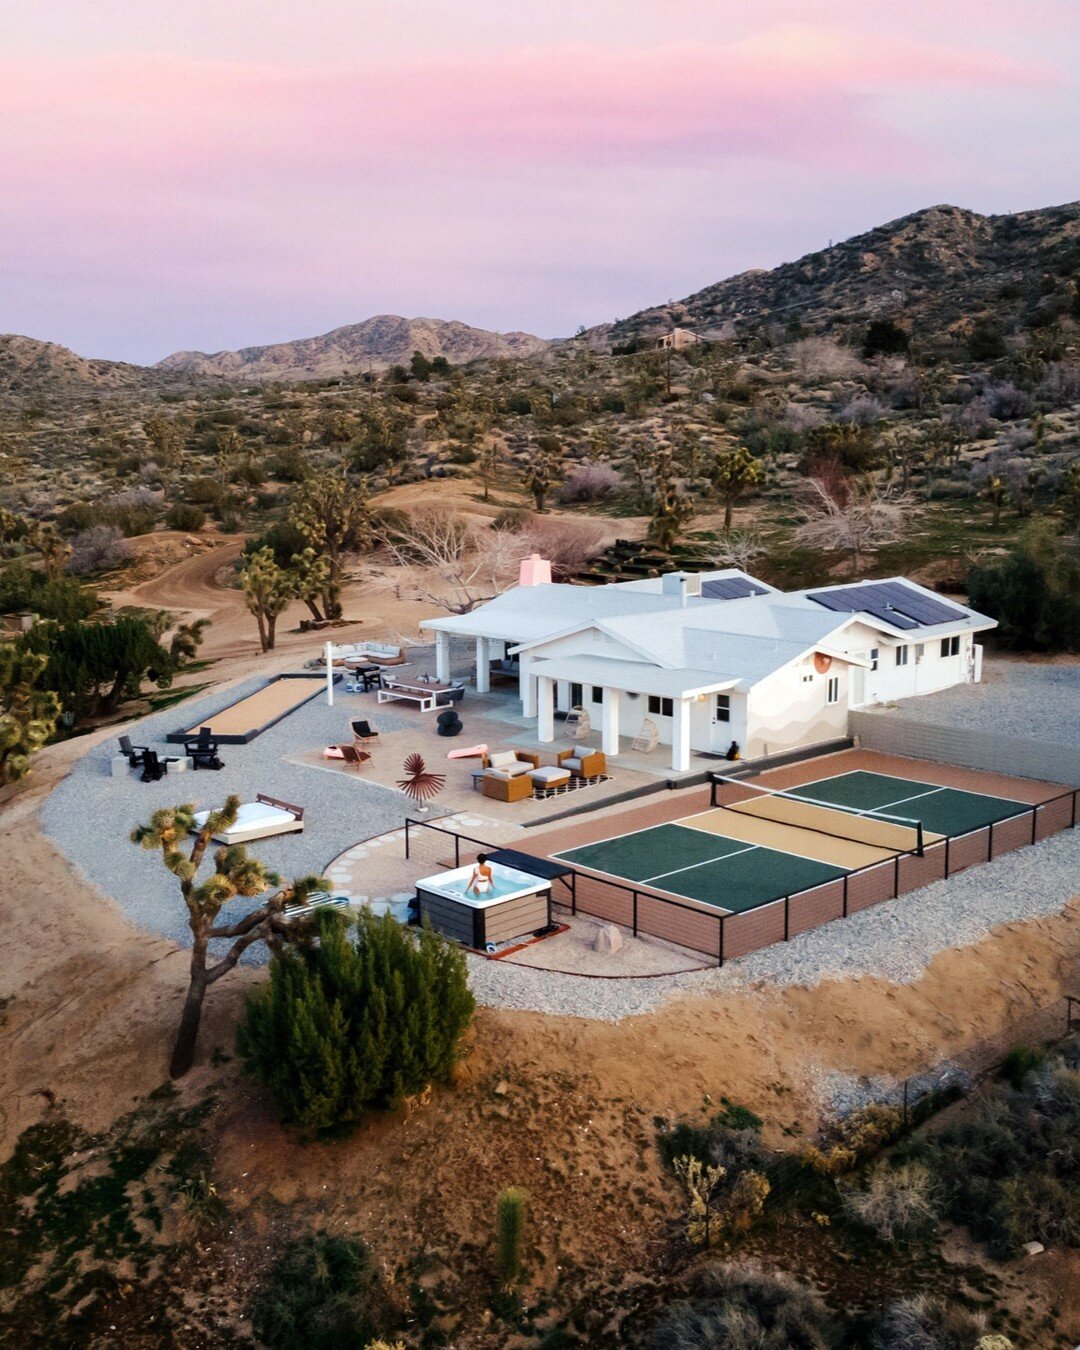 @the_hoopahouse is pure pickleball paradise in the high desert. 🌵🏓
.
.
🤙 Shoutout to @radpickleball for hooking us up with gear.
⁣⁣⁣⁣⁣⁠⁣⁣⁠.⁠
.⁠⁠
📸 @wildtravelingsoul 
⁠📸 @courticamp 
🏓 @radpickleball 
🛠️ @vivadattola
🏠️ @the_hoopahouse 
.⁠
.⁠